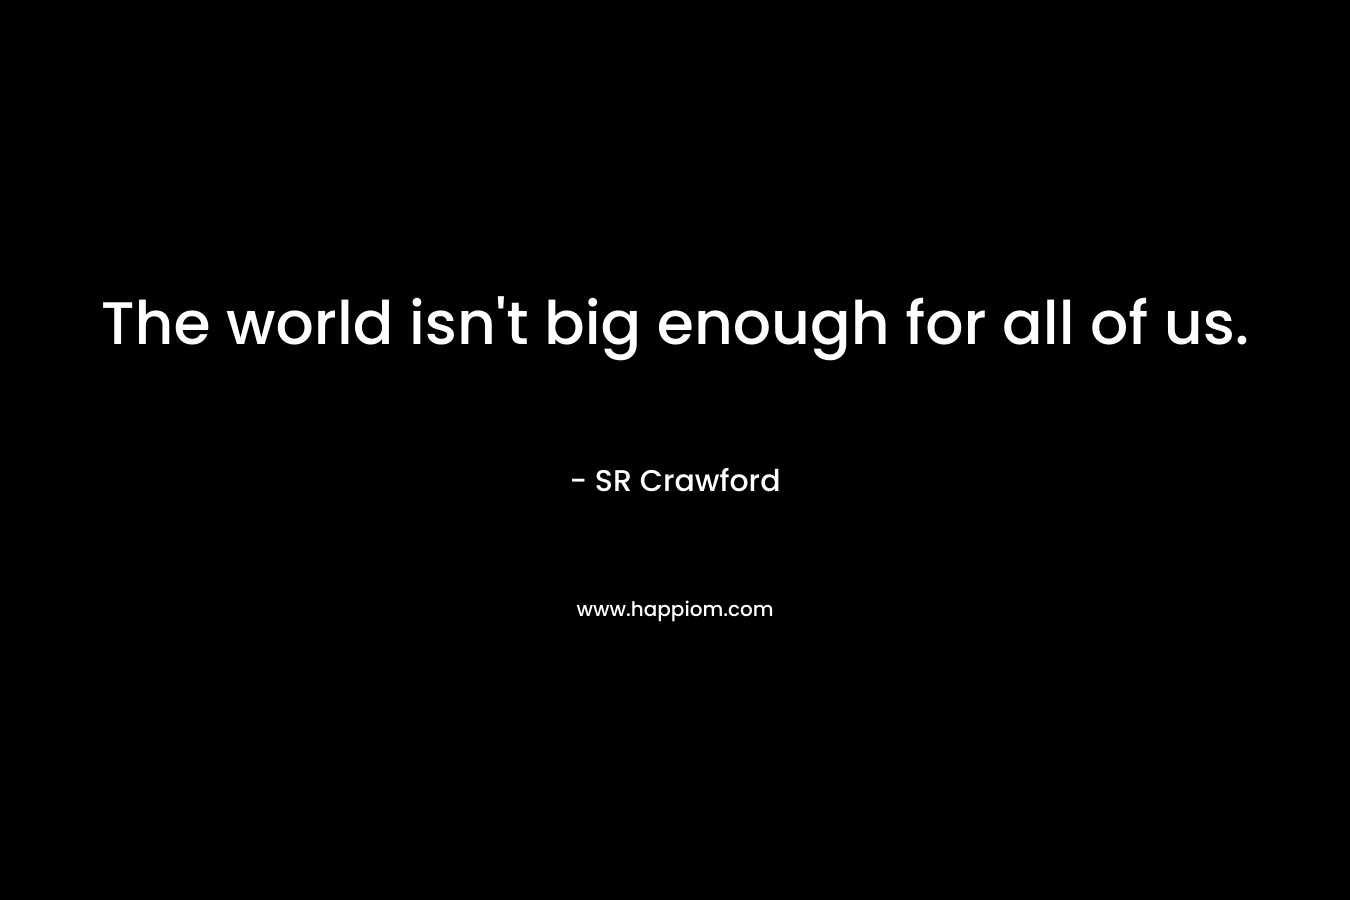 The world isn’t big enough for all of us. – SR Crawford